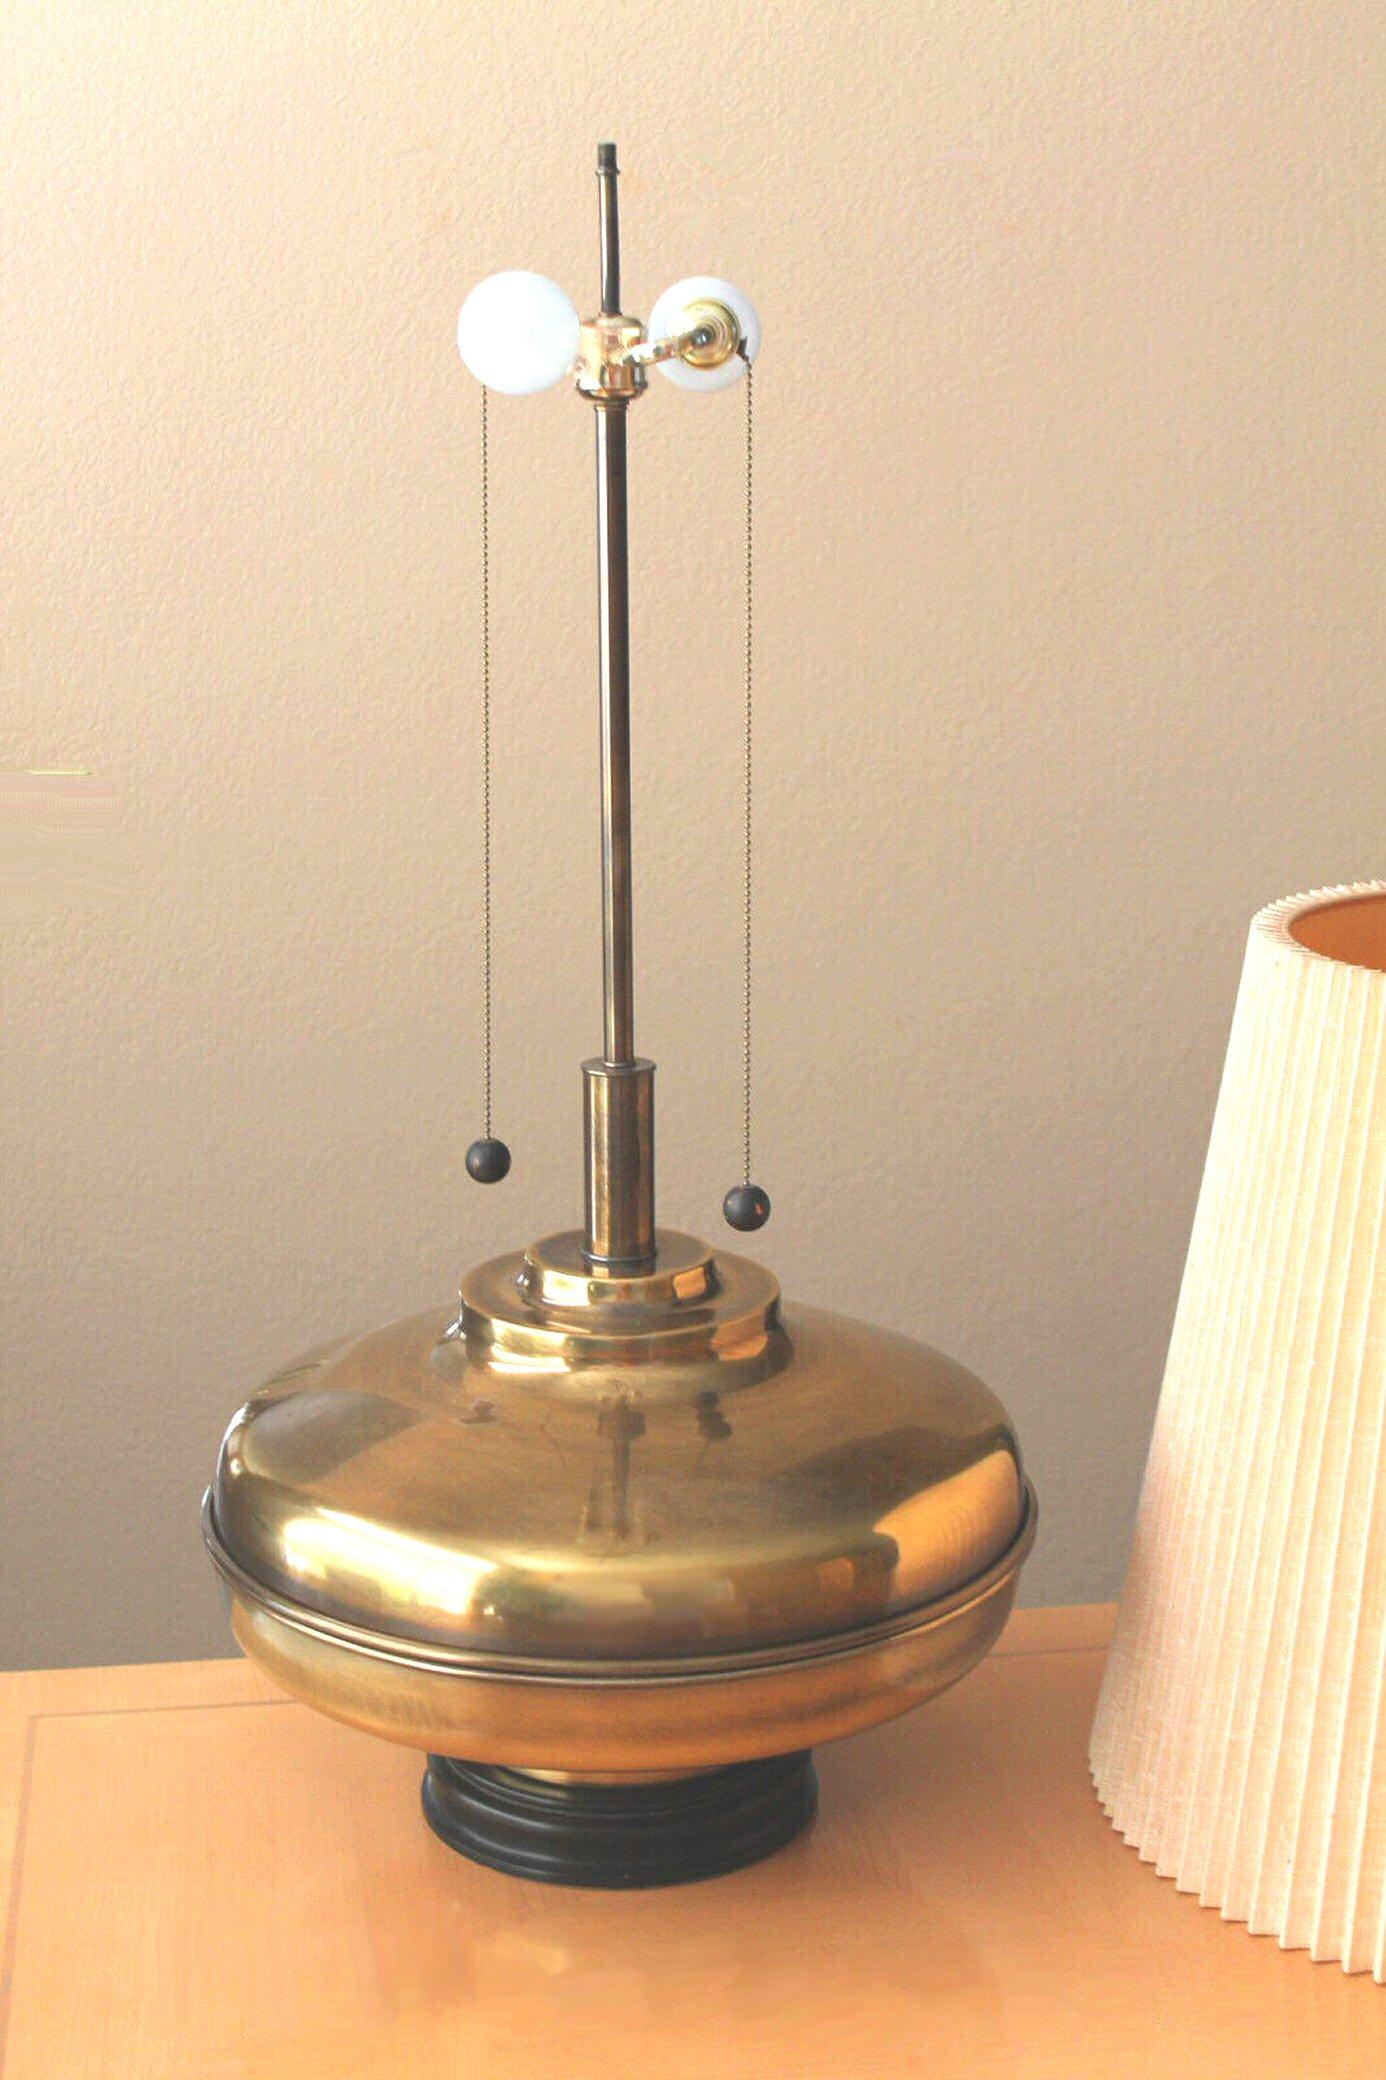 Marvelous MARBRO Mid Century Polished Brass Table Lamp! Huge Showpiece Lighting In Good Condition For Sale In Peoria, AZ